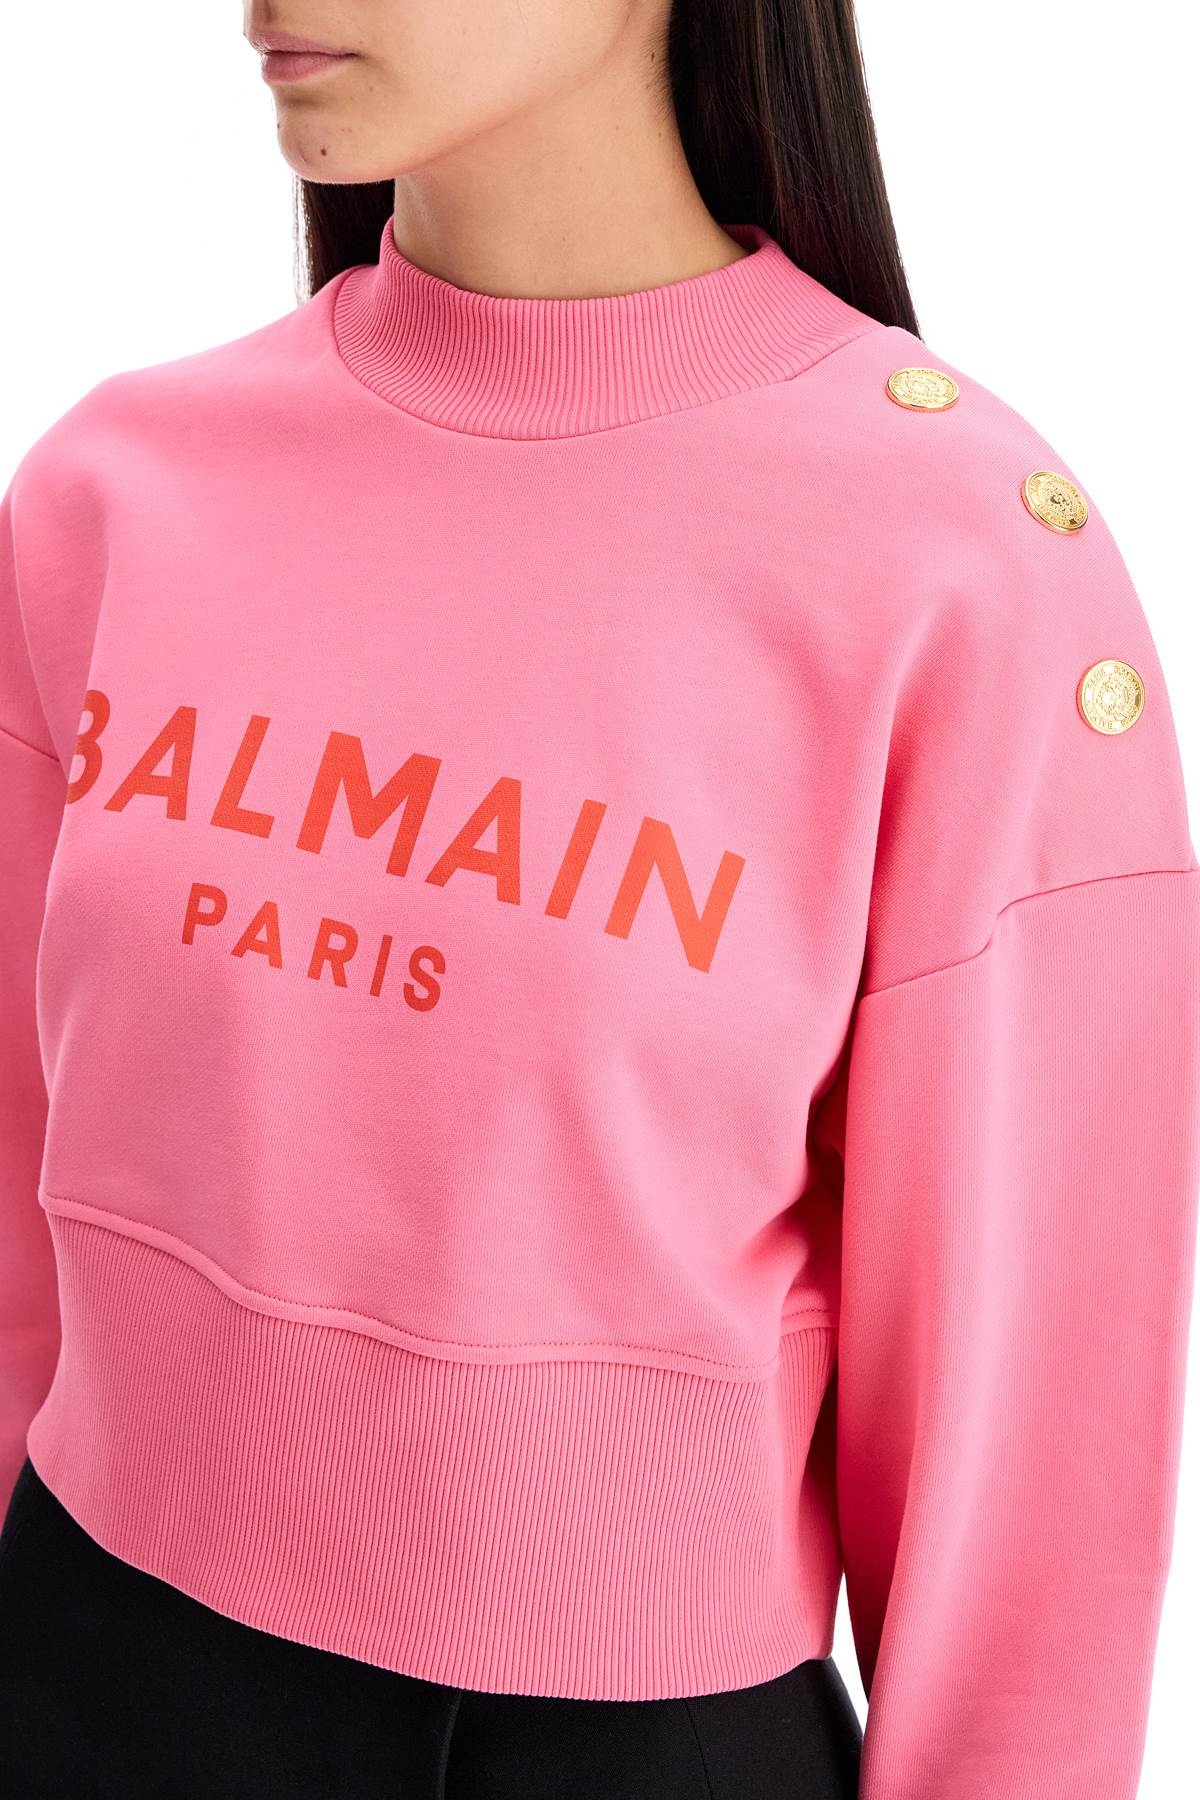 Balmain Cropped Sweatshirt With Buttons - 5